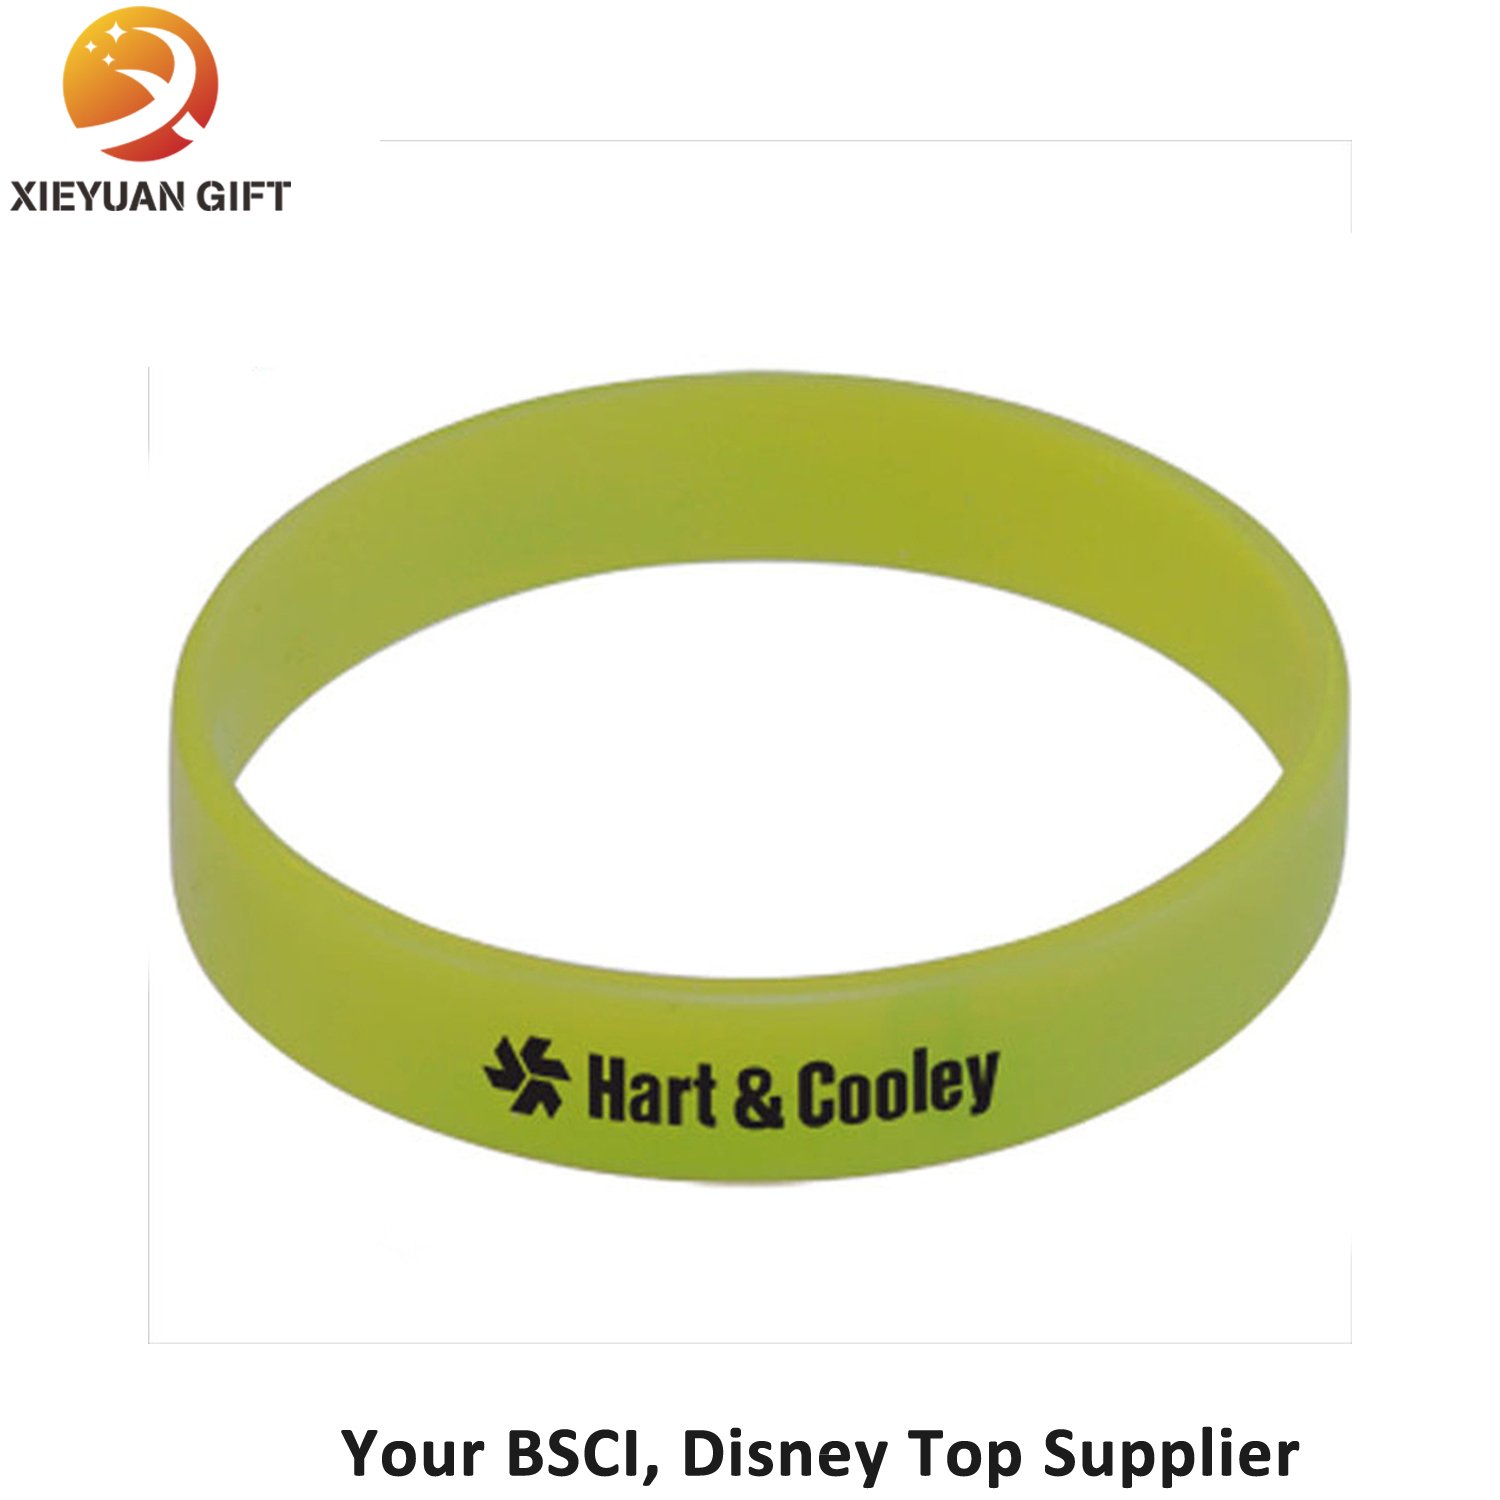 Green Silicon Wristband Size for Adults with Written